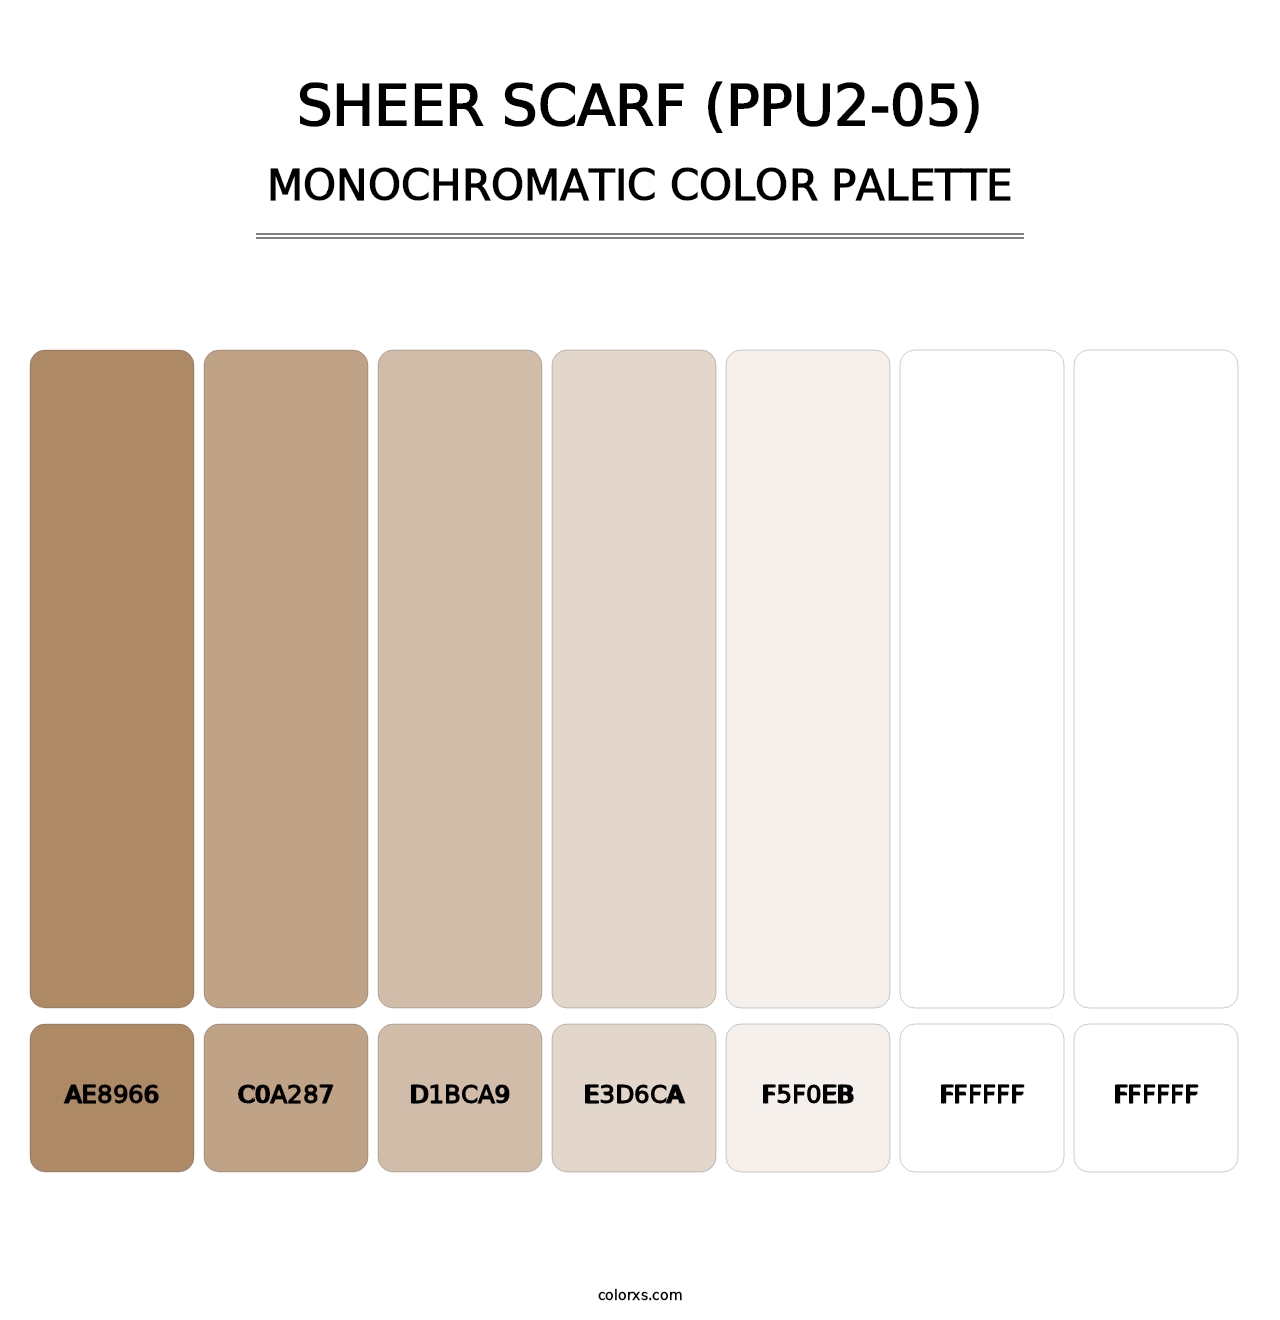 Sheer Scarf (PPU2-05) - Monochromatic Color Palette